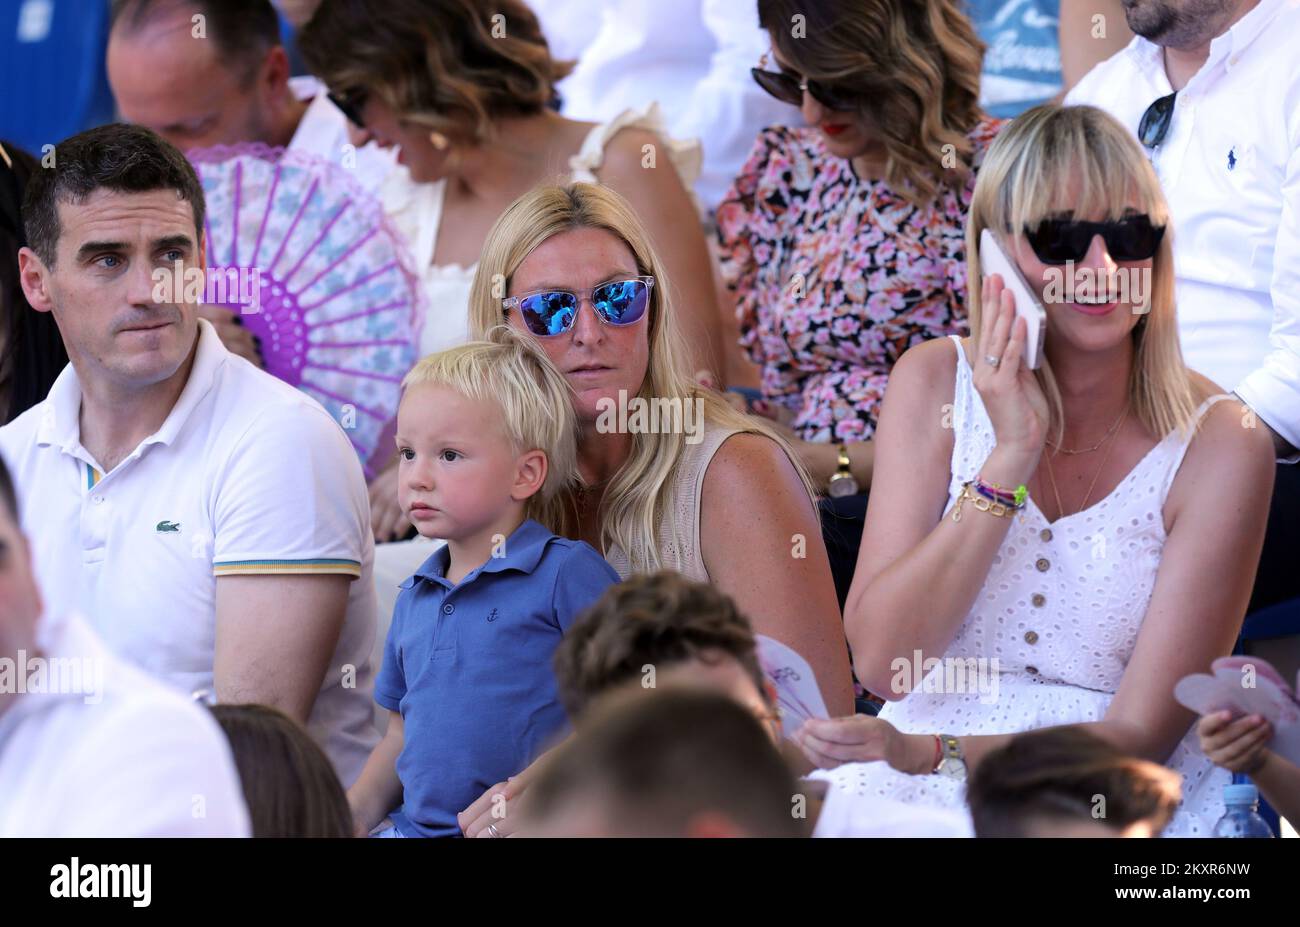 A former Croatian alpine skier Janica Kostelic with her son in the audience during the famous knight's game Sinjska Alka that was held for the 306th time in Sinj on August 8, 2021. Alka is the last stage of the competition after Bara and Coja. Alka is a competition in which alkars ride horses to throw an alka spear. The Alkar competition is conducted in such a way that the Alkar on horseback in a full race spears a spear that hangs in the middle of a rope stretched horizontally between two pillars attached to the edges of the racetrack. Each alkar wears an antique knight's uniform in the most Stock Photo